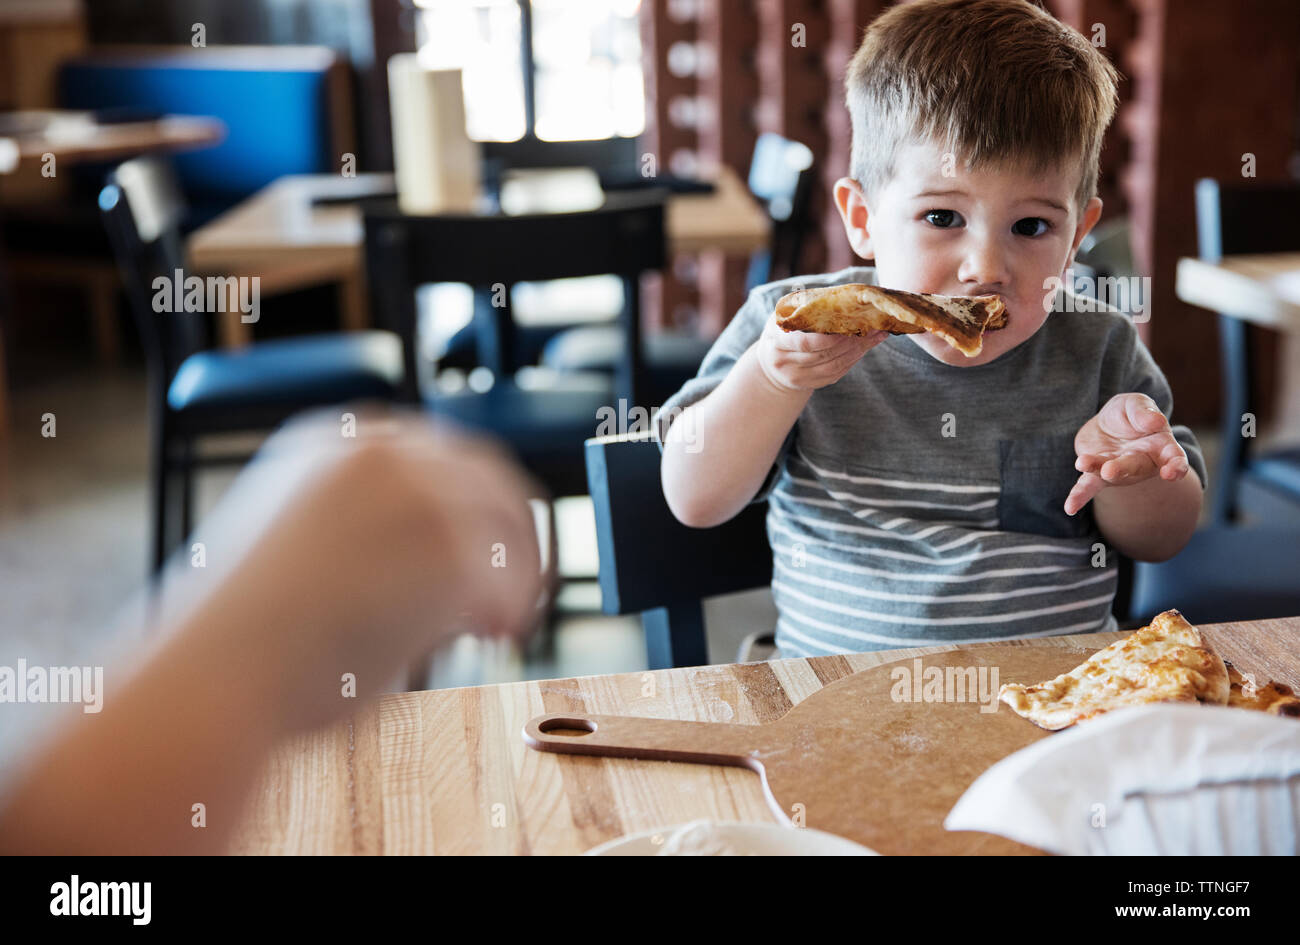 Portrait of cute boy eating pizza at restaurant Stock Photo